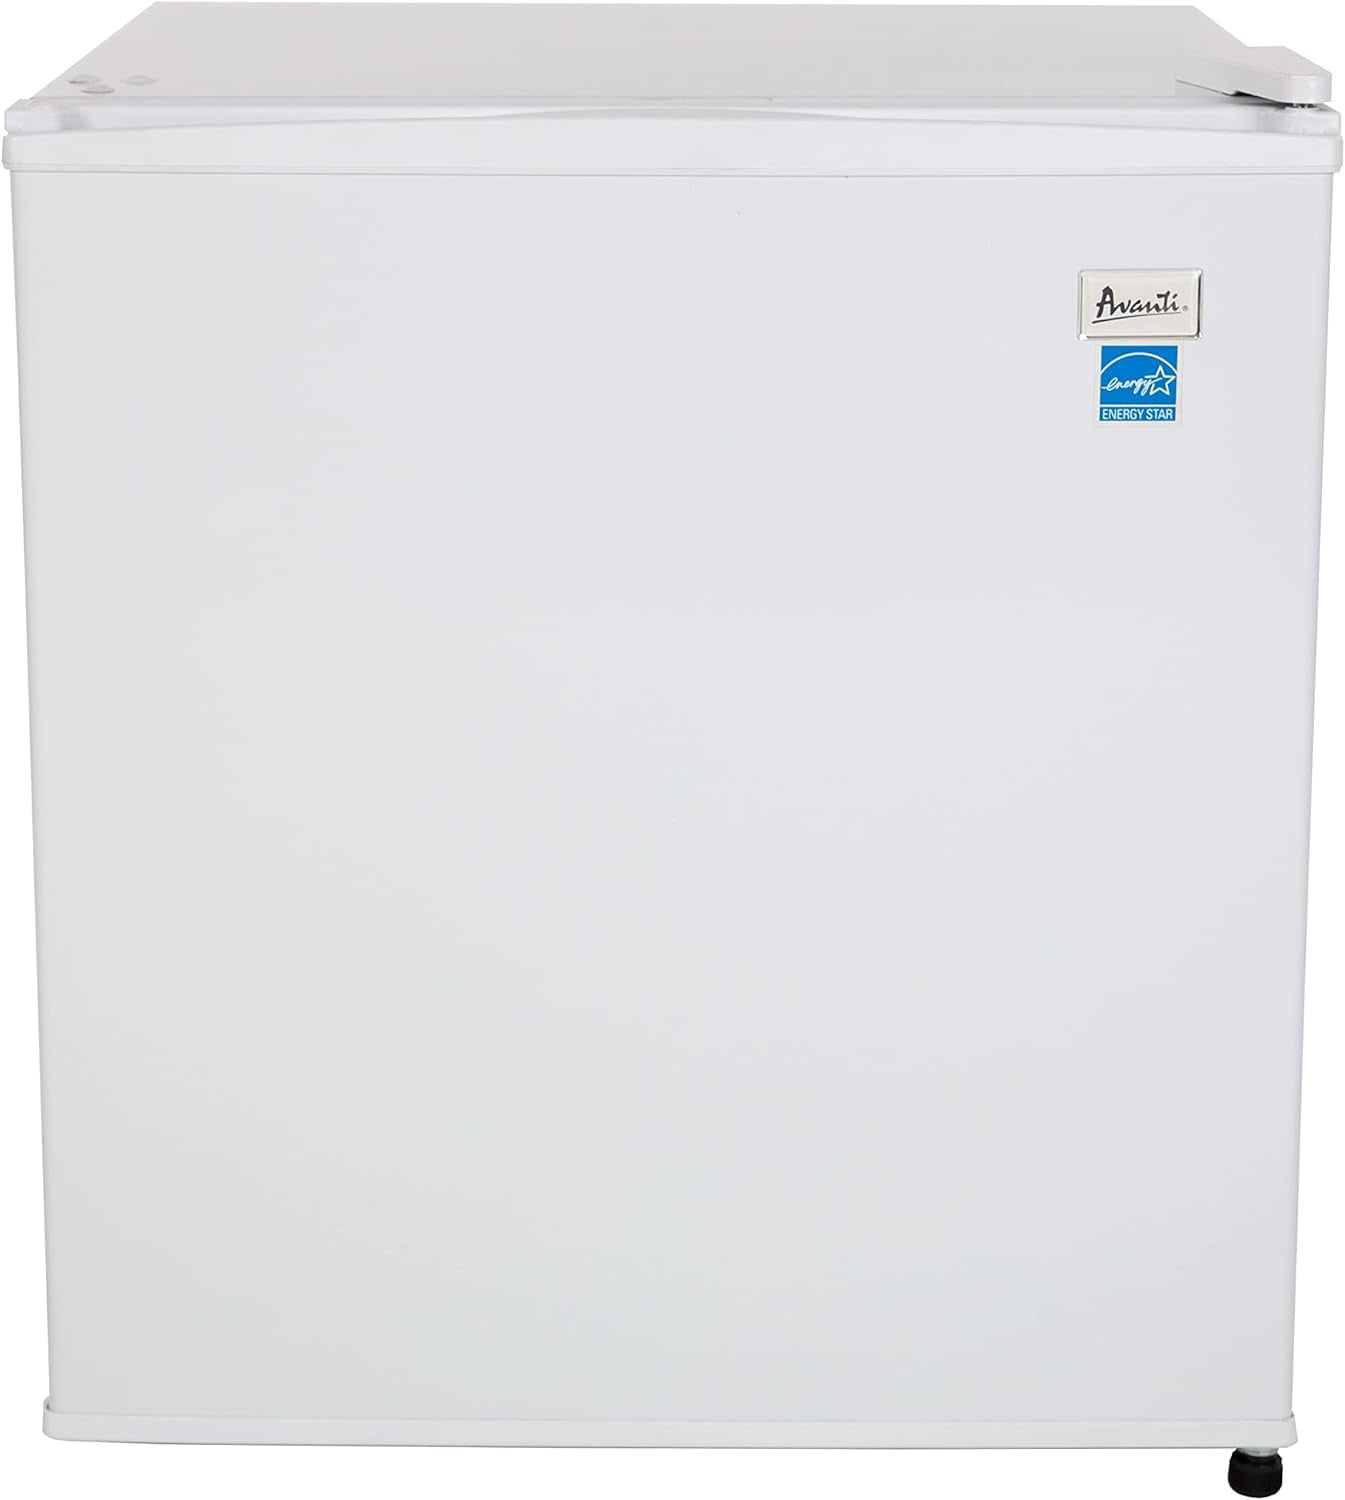 Offer For AR17T0W 1.7 Cubic Foot Refrigerator, 20.3" X 18" X 18.3", White MowerShop